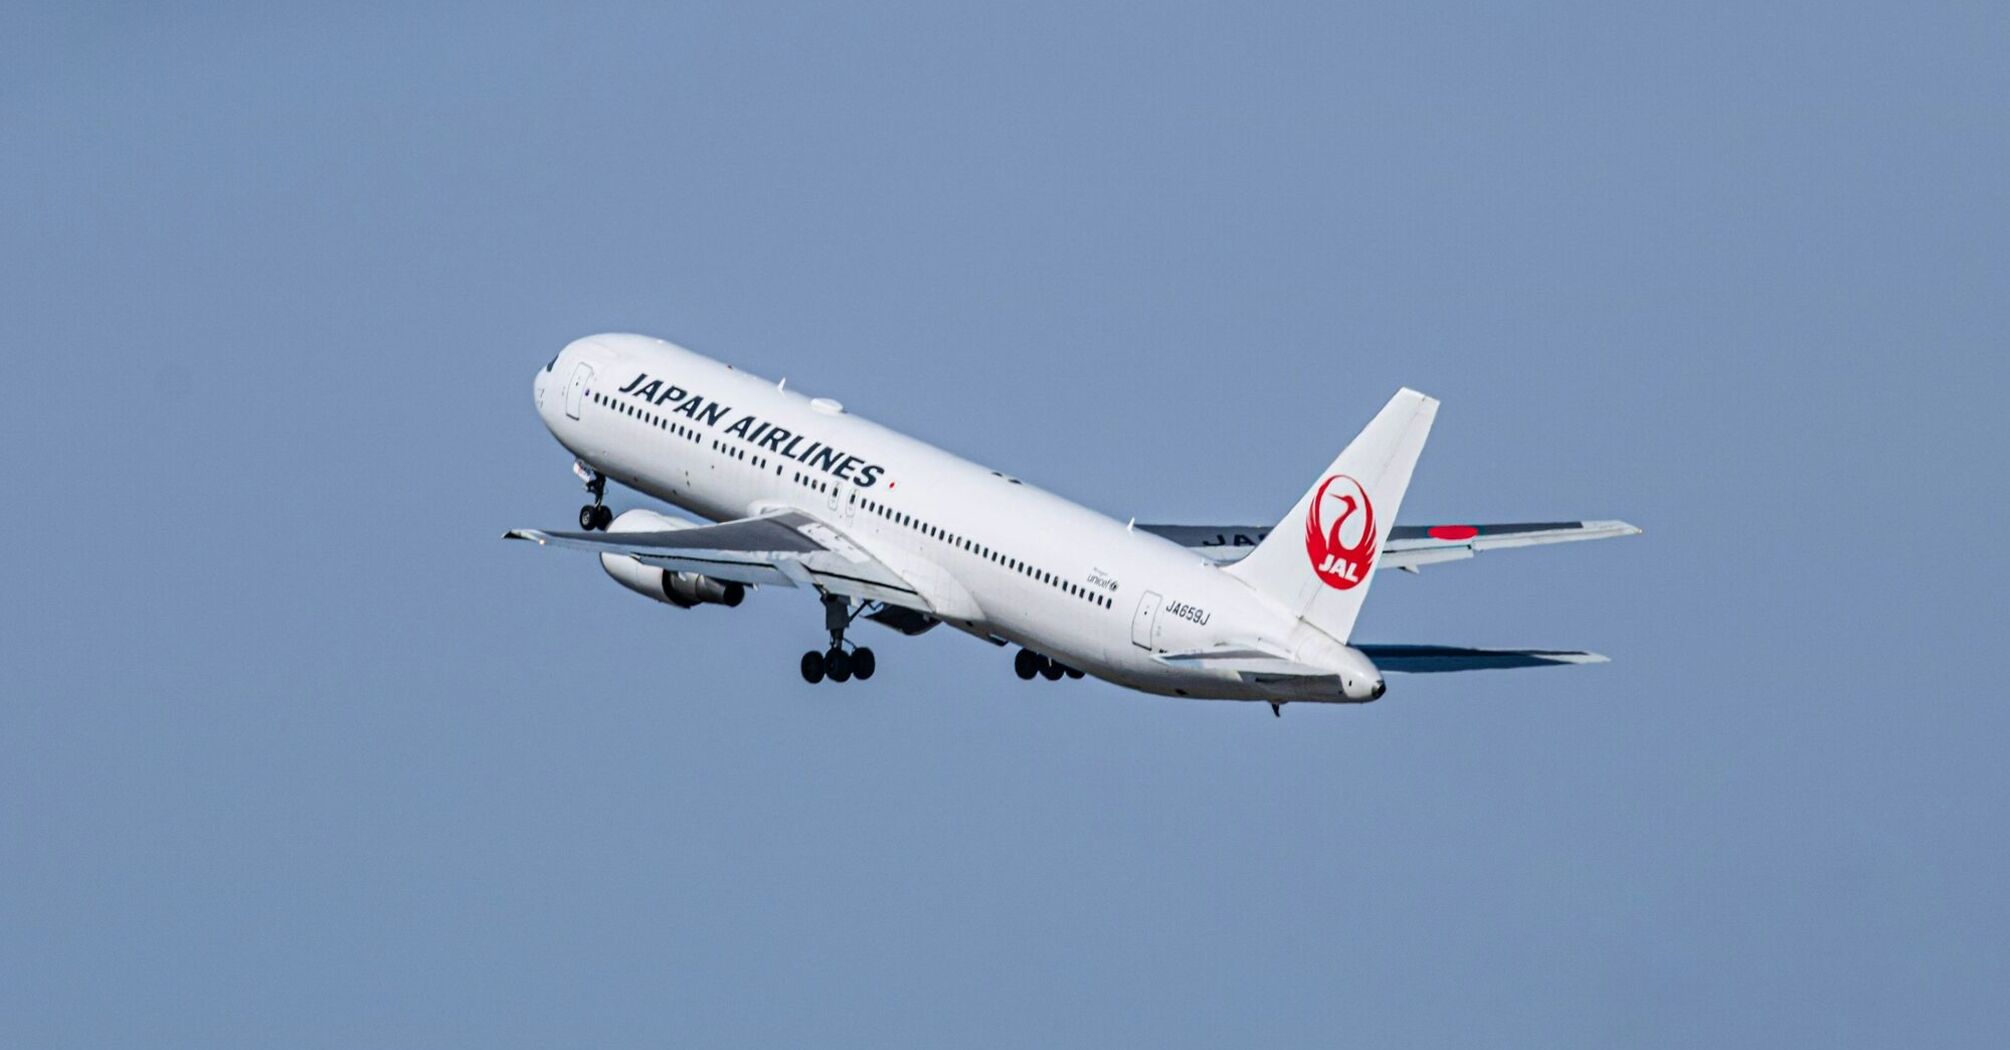 Japan Airlines airplane taking off into the sky